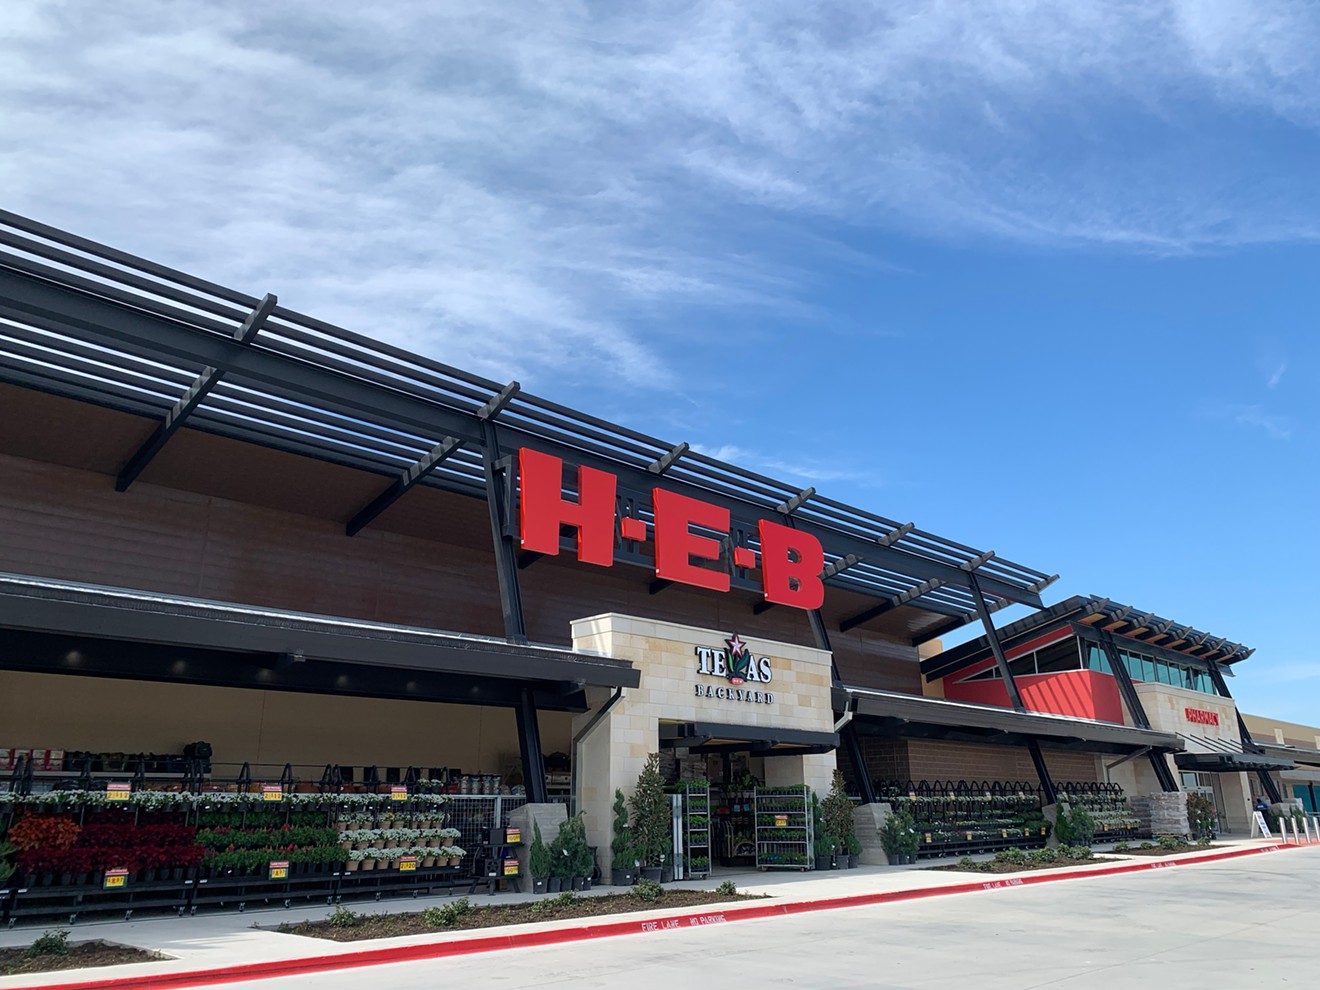 You get an H-E-B! And YOU get an H-E-B!